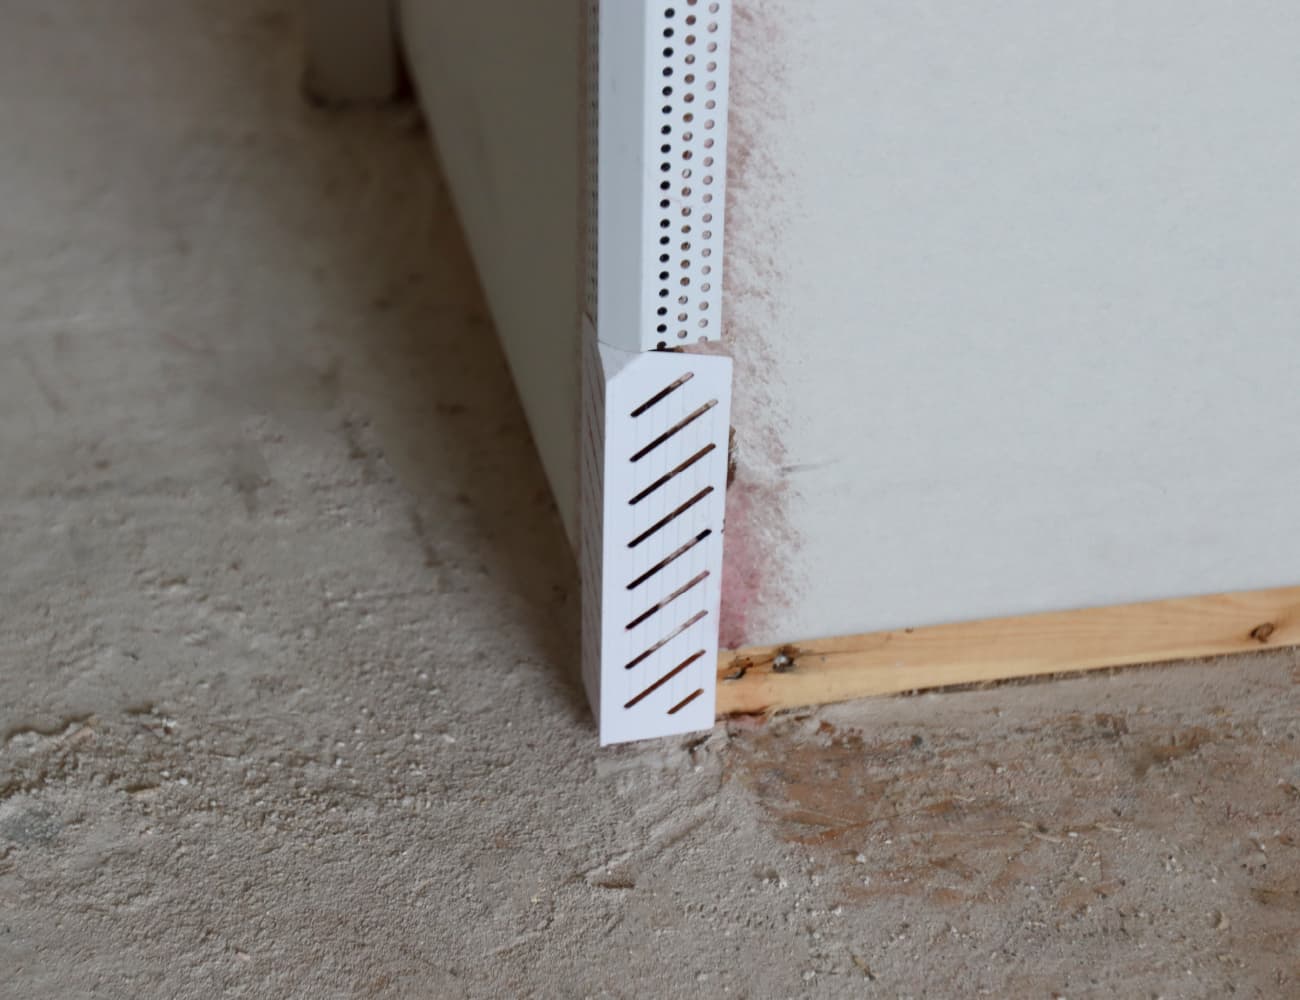 How to Finish Chamfer Baseboards_11.17.21 6